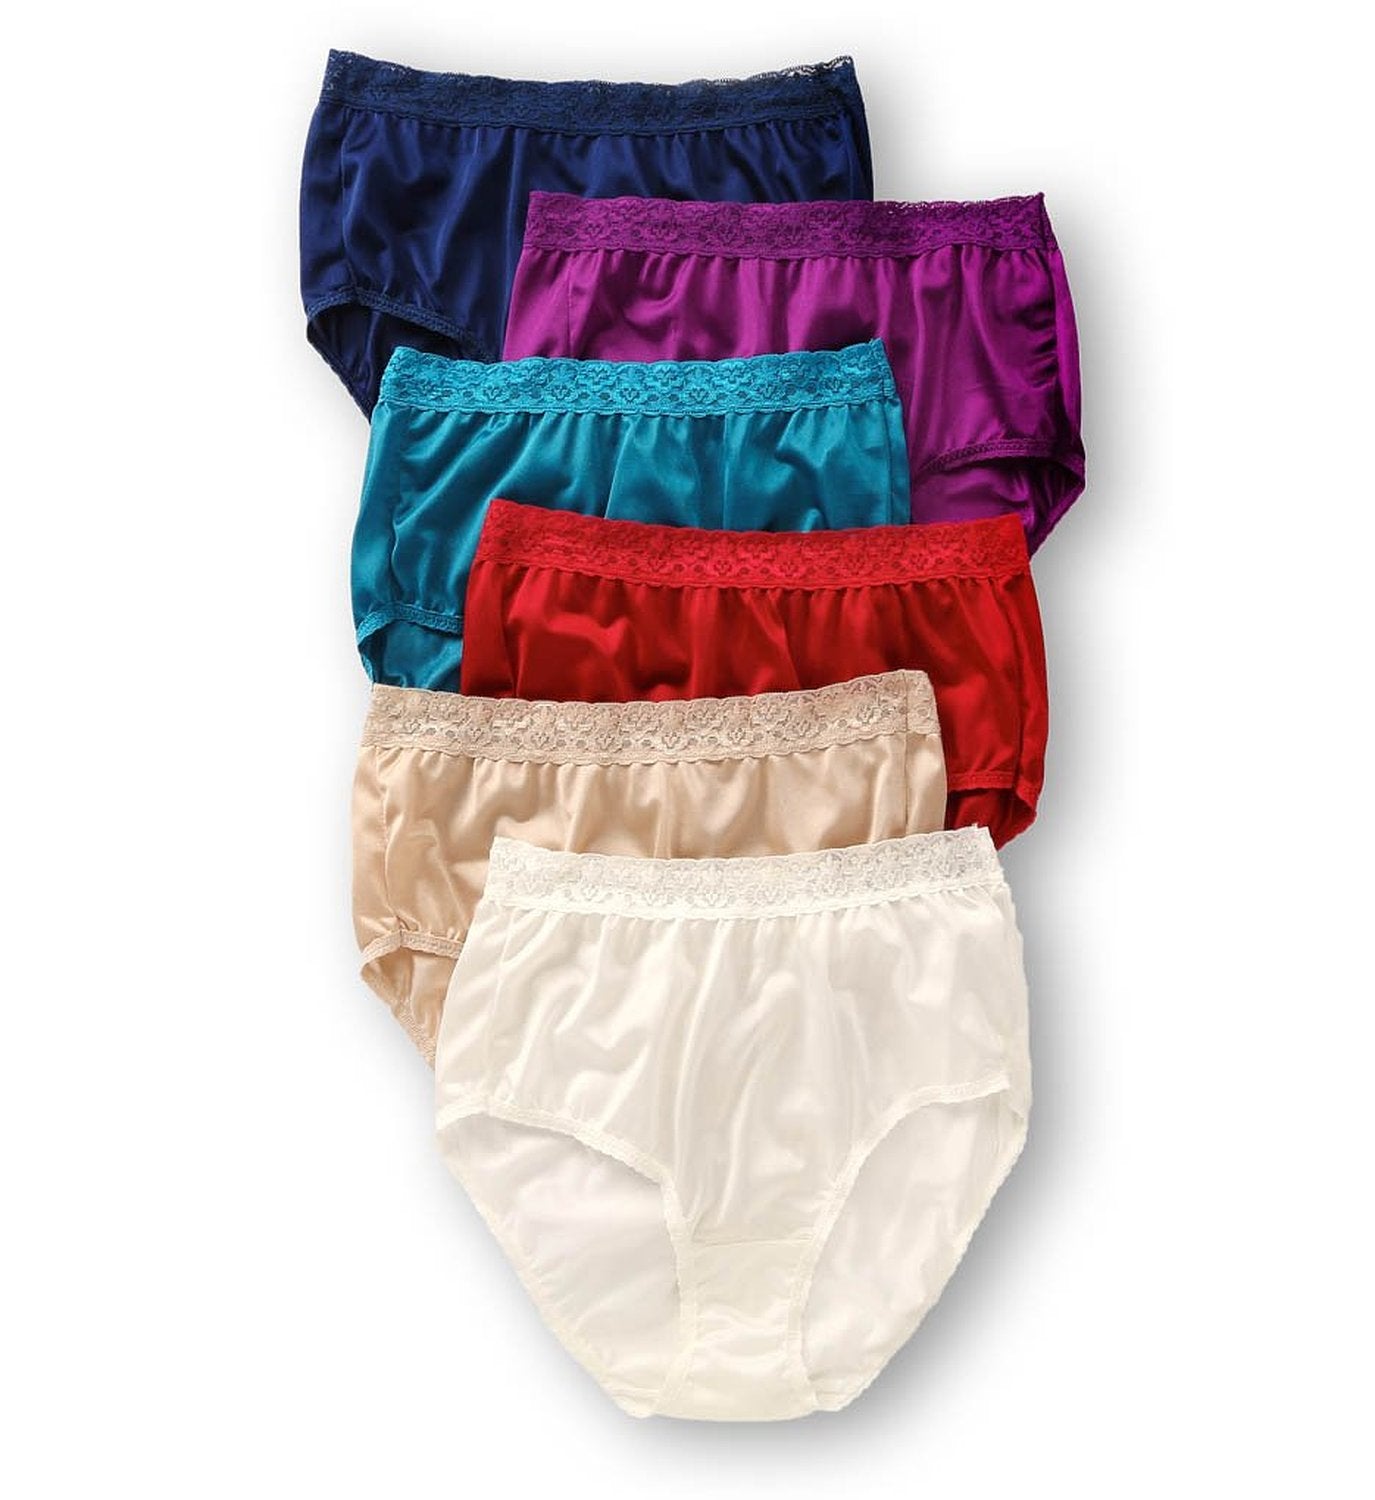 Assorted Womens Nylon Brief Panties 6-Pack - Size 6